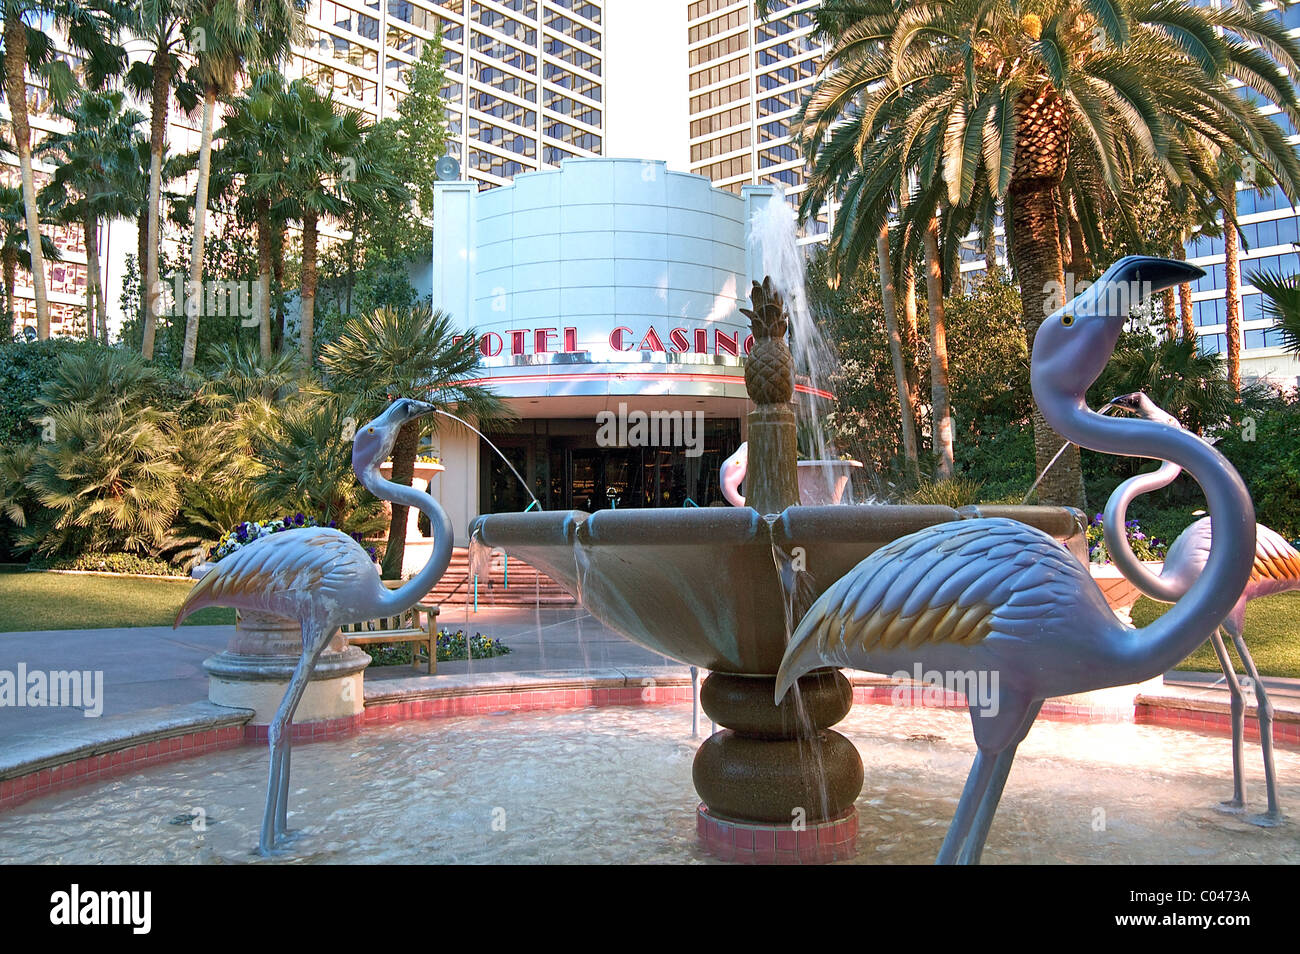 Flamingo figures in a fountain at the Flamingo Las Vegas Hotel and Casino Stock Photo